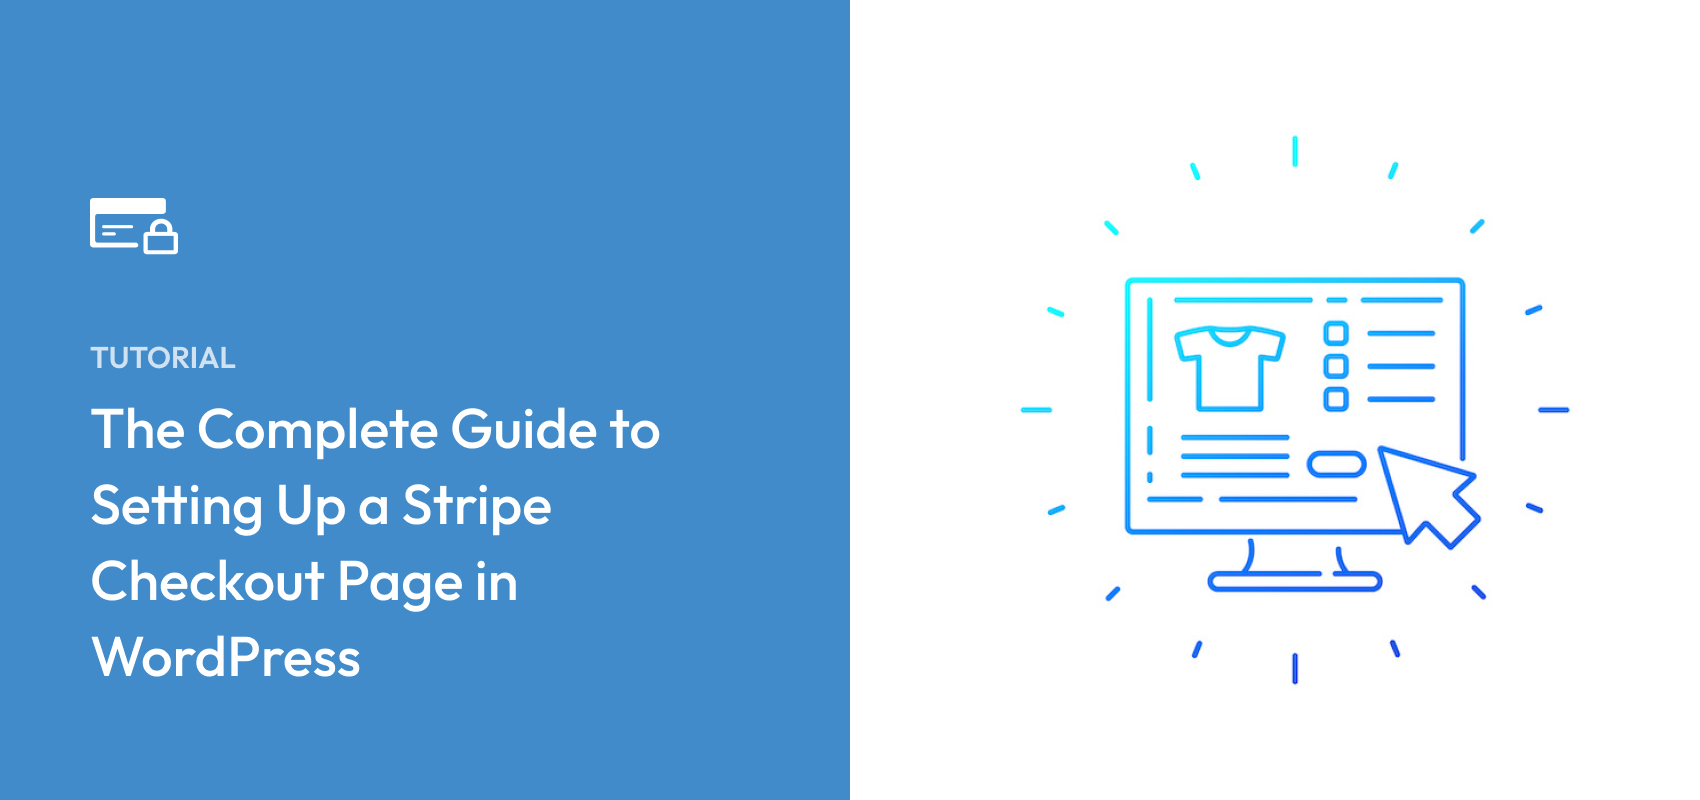 The Complete Guide to Stripe Checkout Page for WordPress